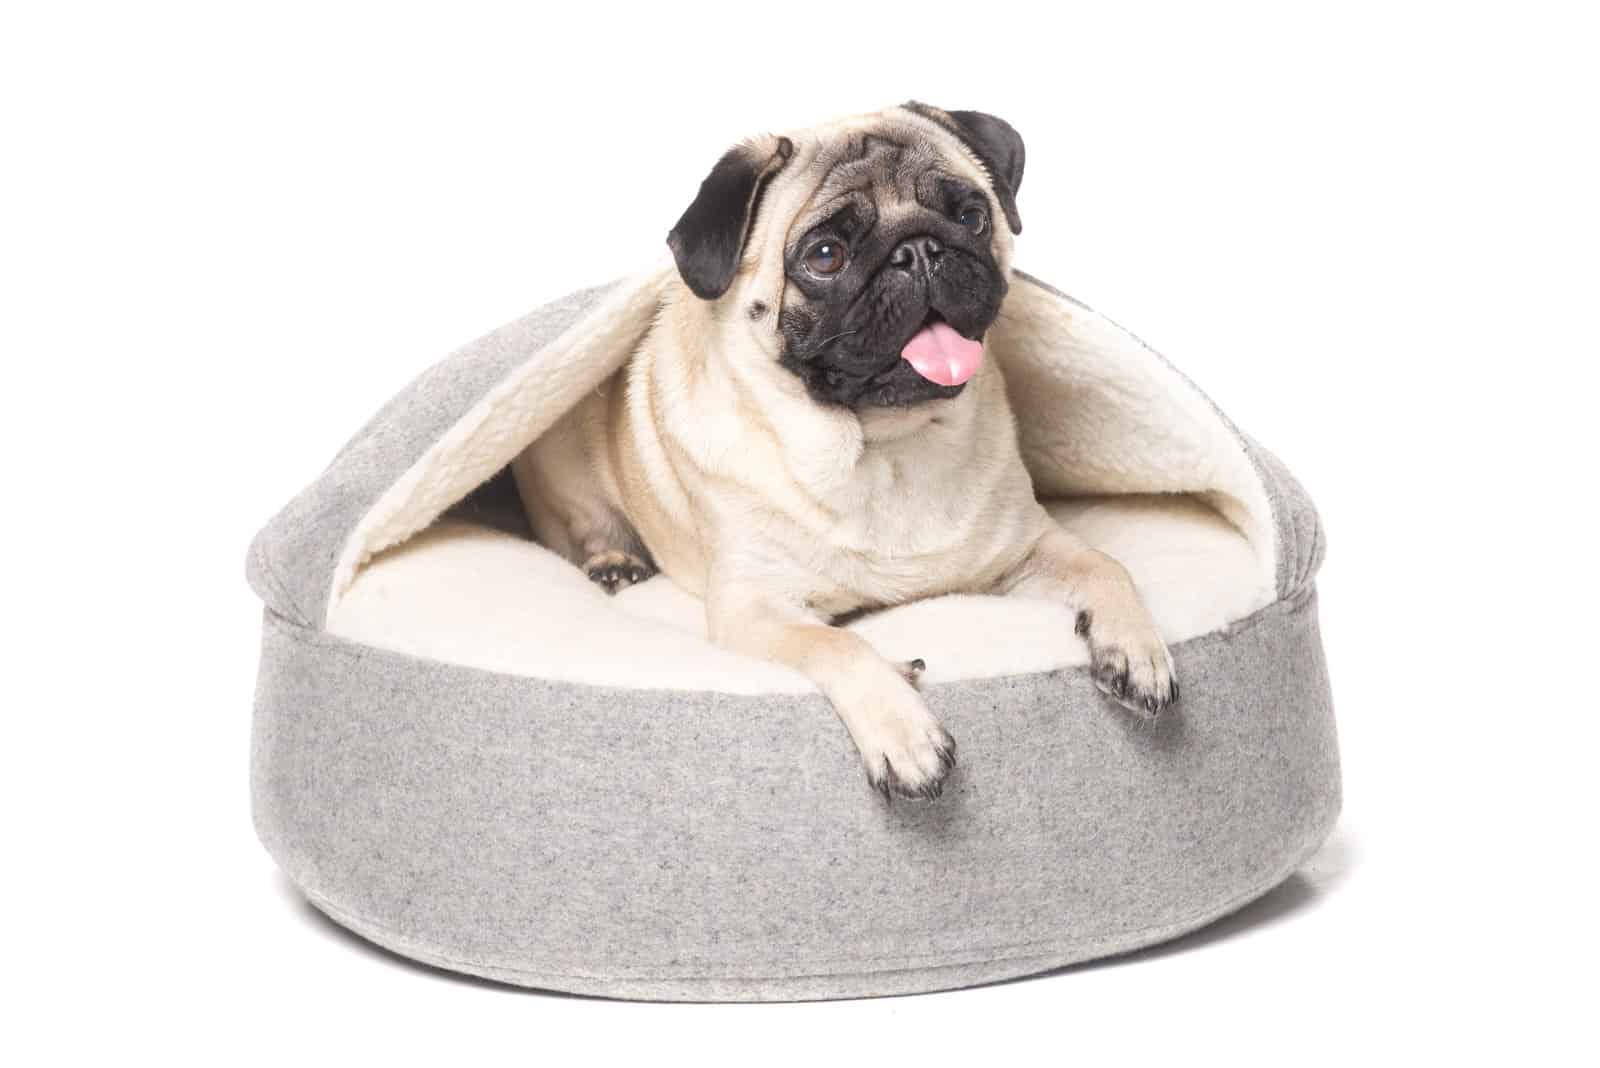 8 Best Dog Beds For Pugs: Reviews And Buyer’s Guide